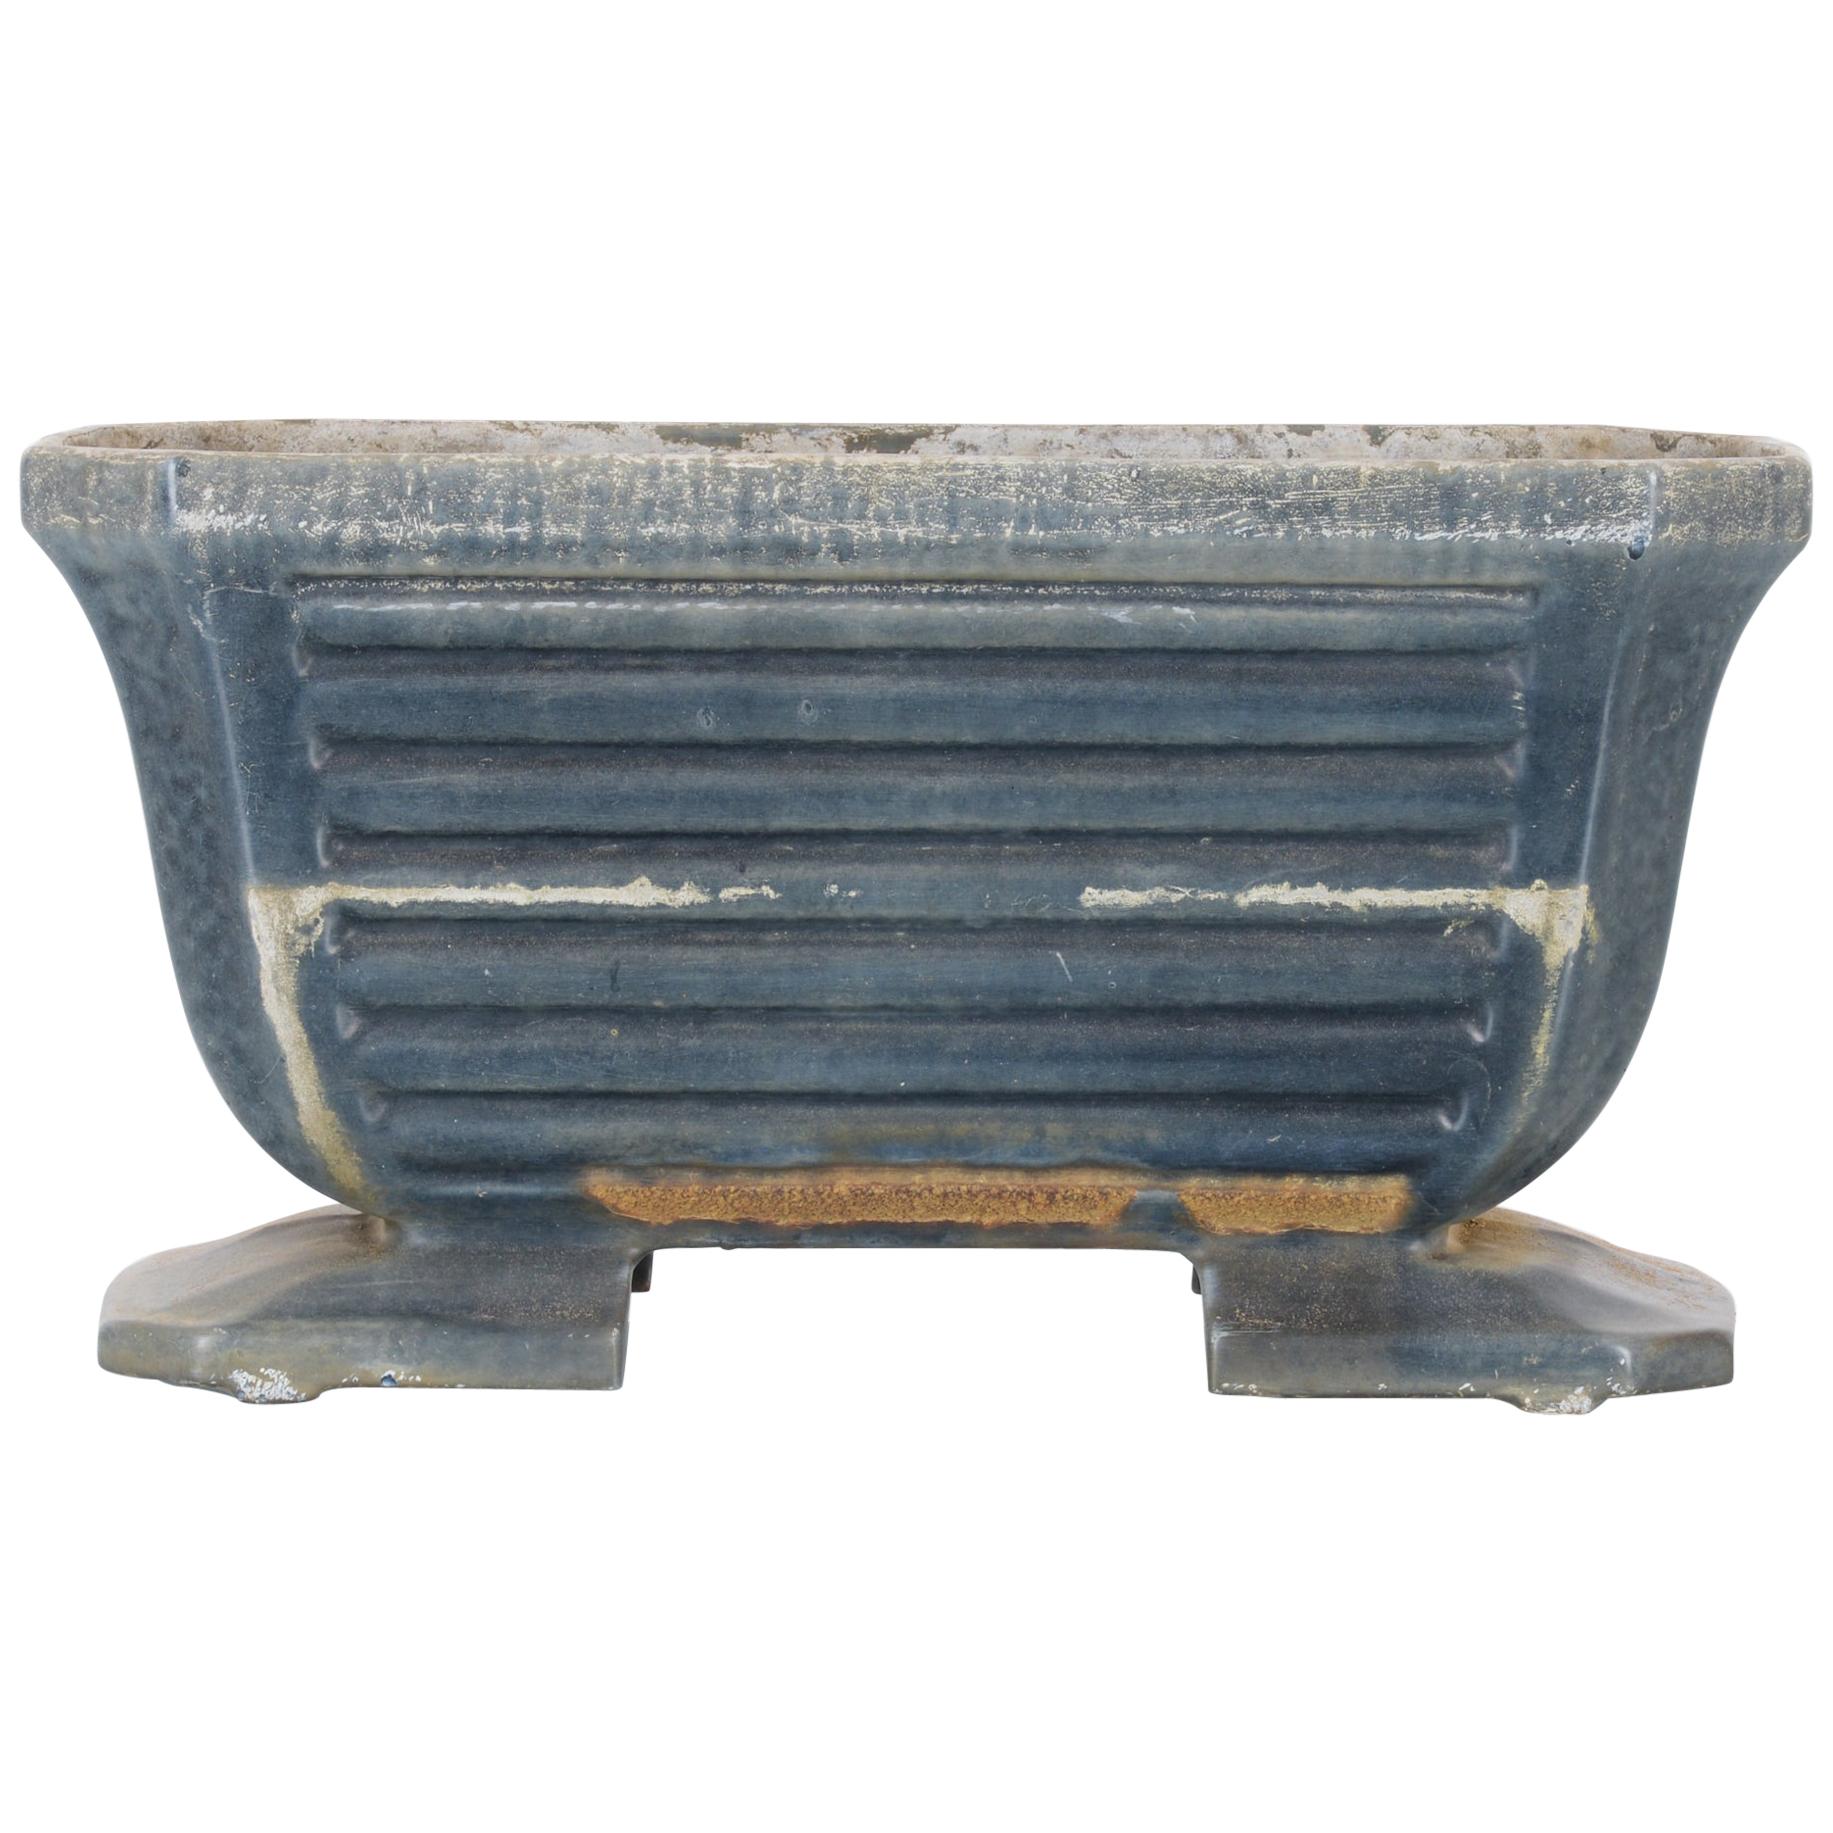 This cast iron planter was made in France, circa 1900. Elevated on two feet, the planter features a wide U-shaped design, which is complemented by the rows of horizontal fluting on its body. It displays a beautifully weathered slate blue patina.